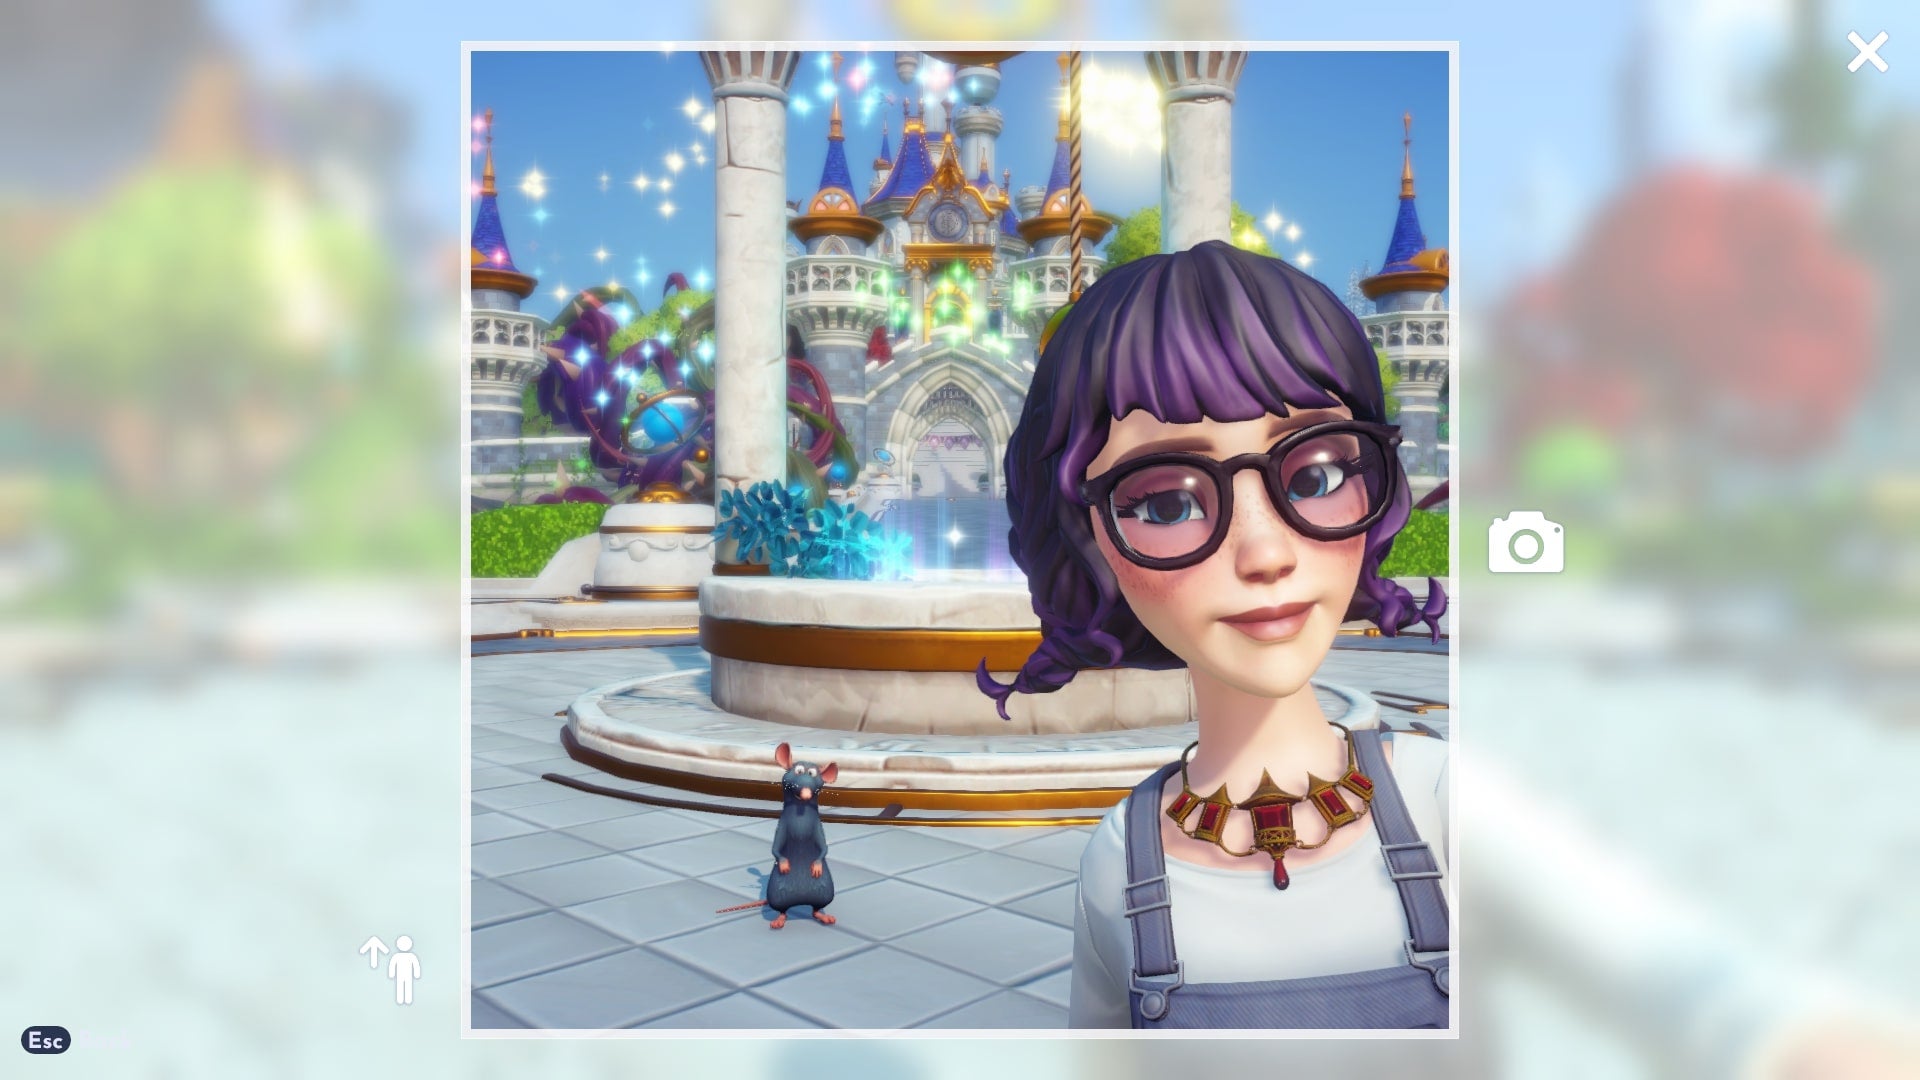 A player takes a selfie with Remy after he moves into the town in Disney Dreamlight Valley